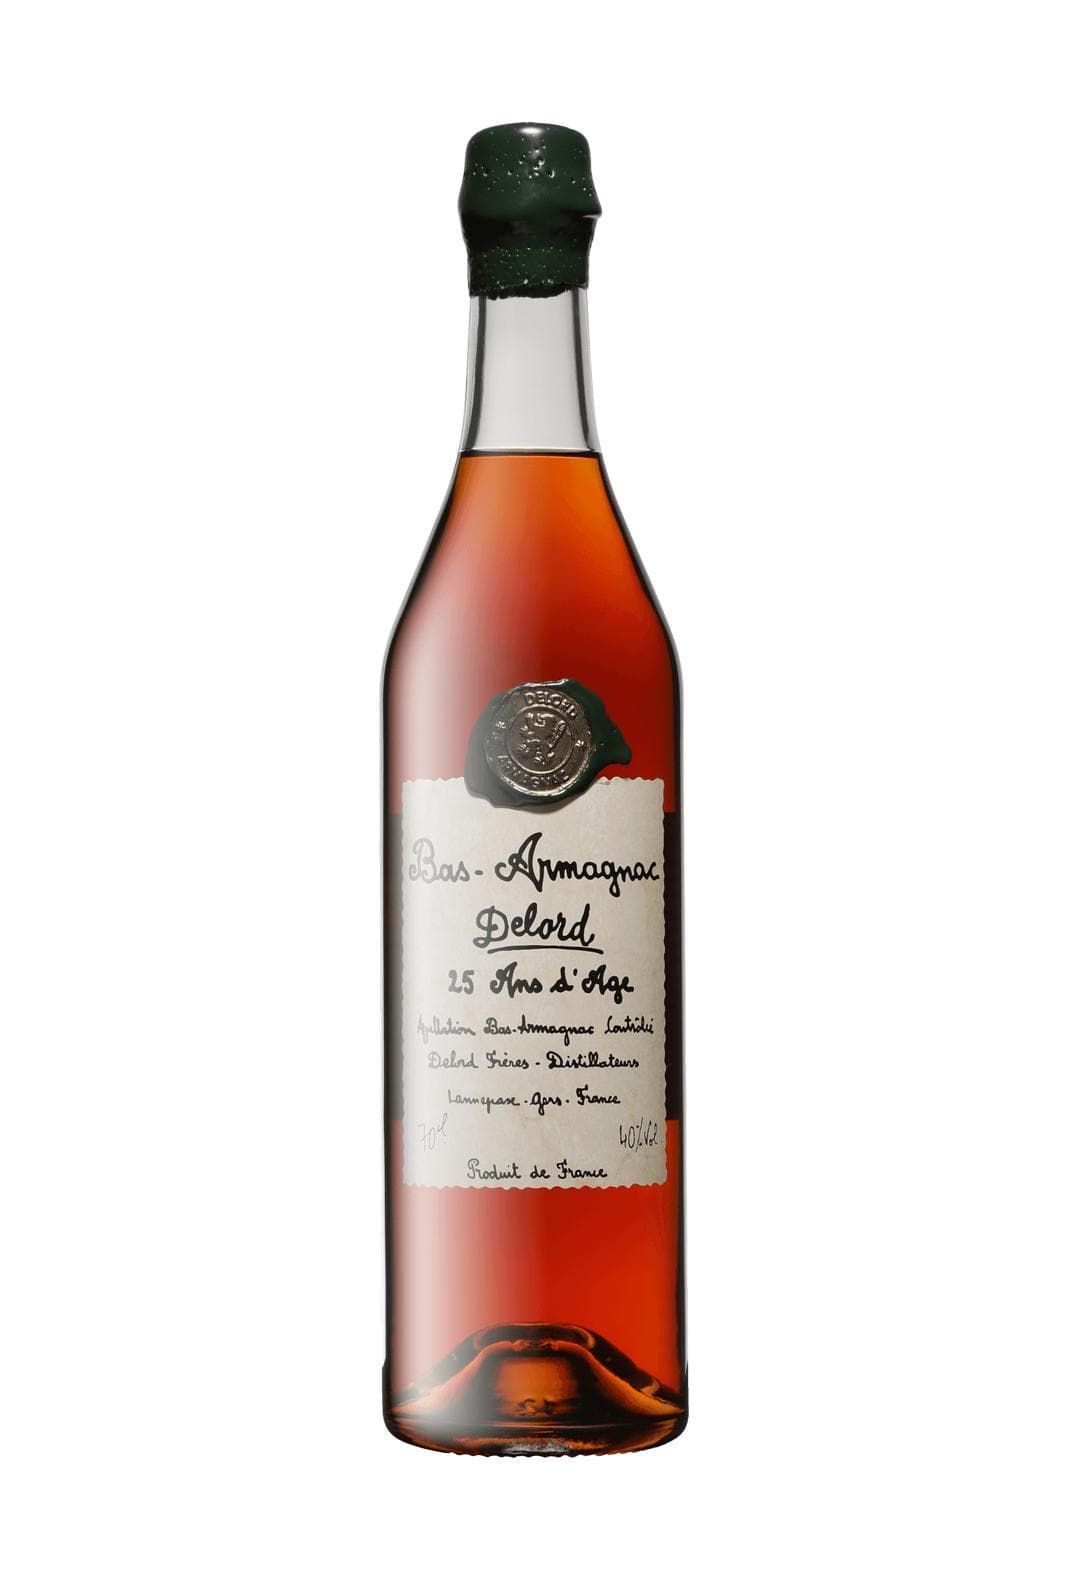 Delord 25 year Bas Armagnac 40% 700ml | Brandy | Shop online at Spirits of France